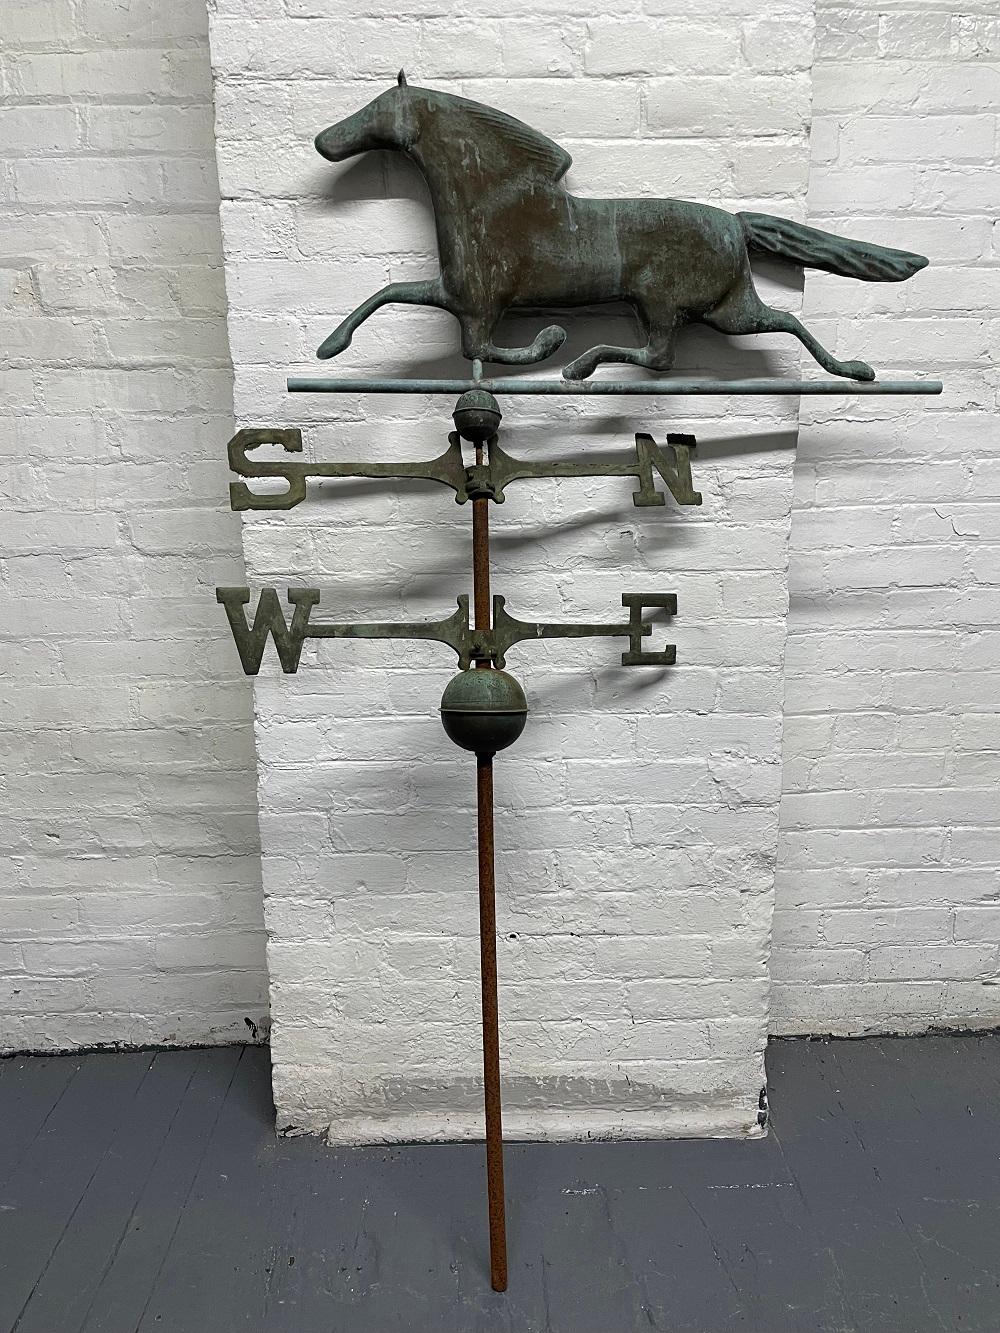 Antique bronze horse weathervane. The weathervane has it's own original patina. The weathervane came from a house in New England.